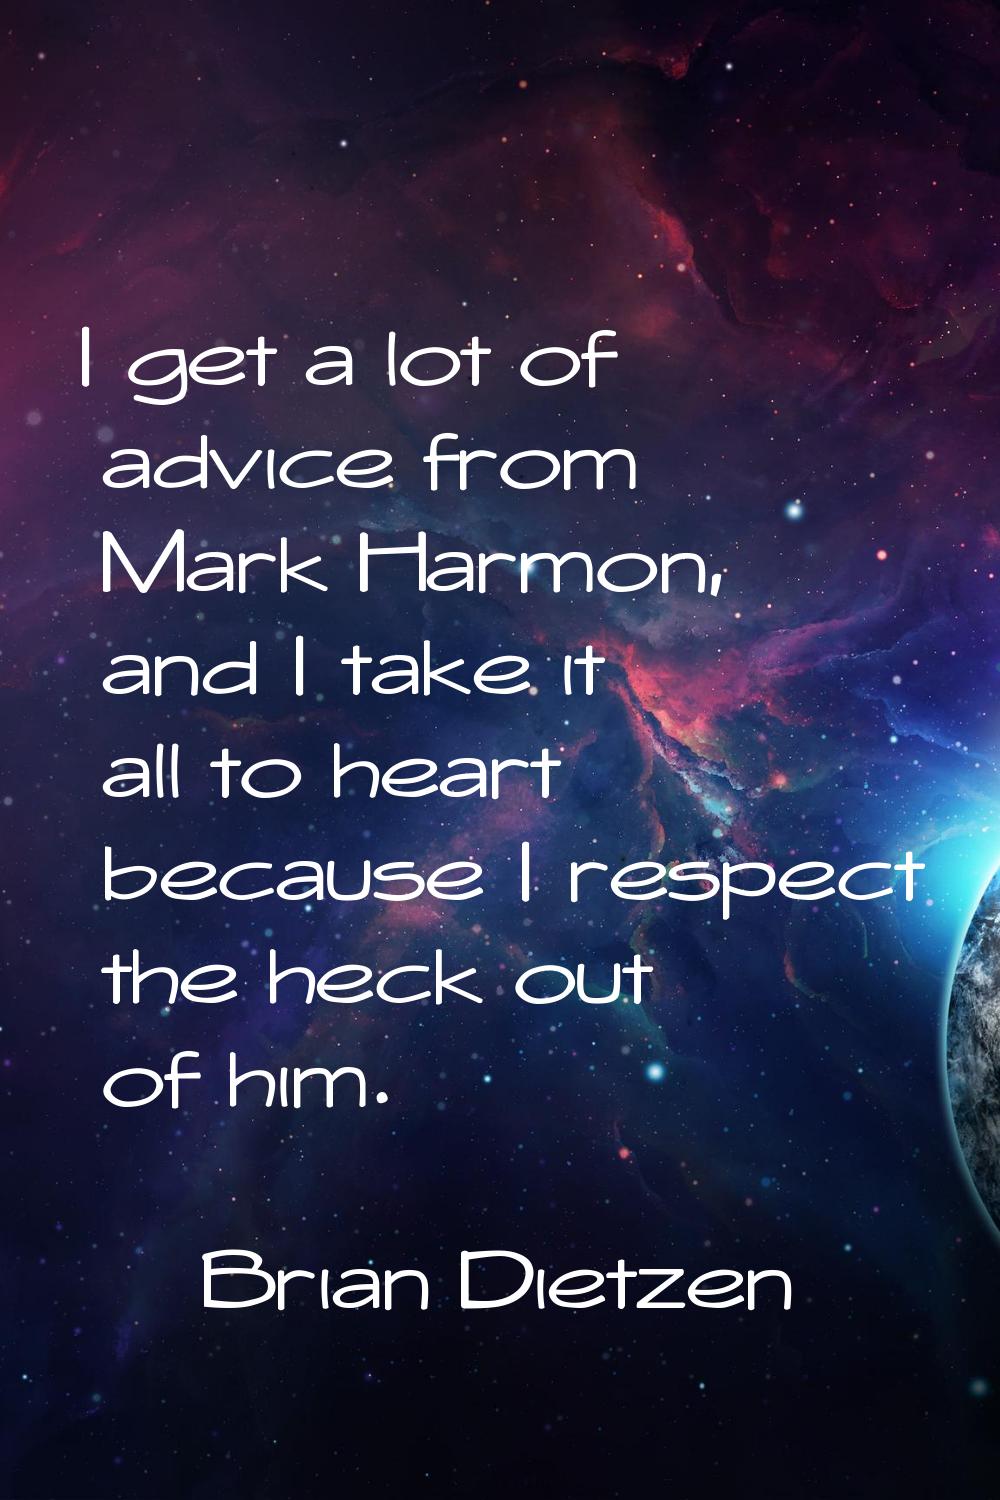 I get a lot of advice from Mark Harmon, and I take it all to heart because I respect the heck out o